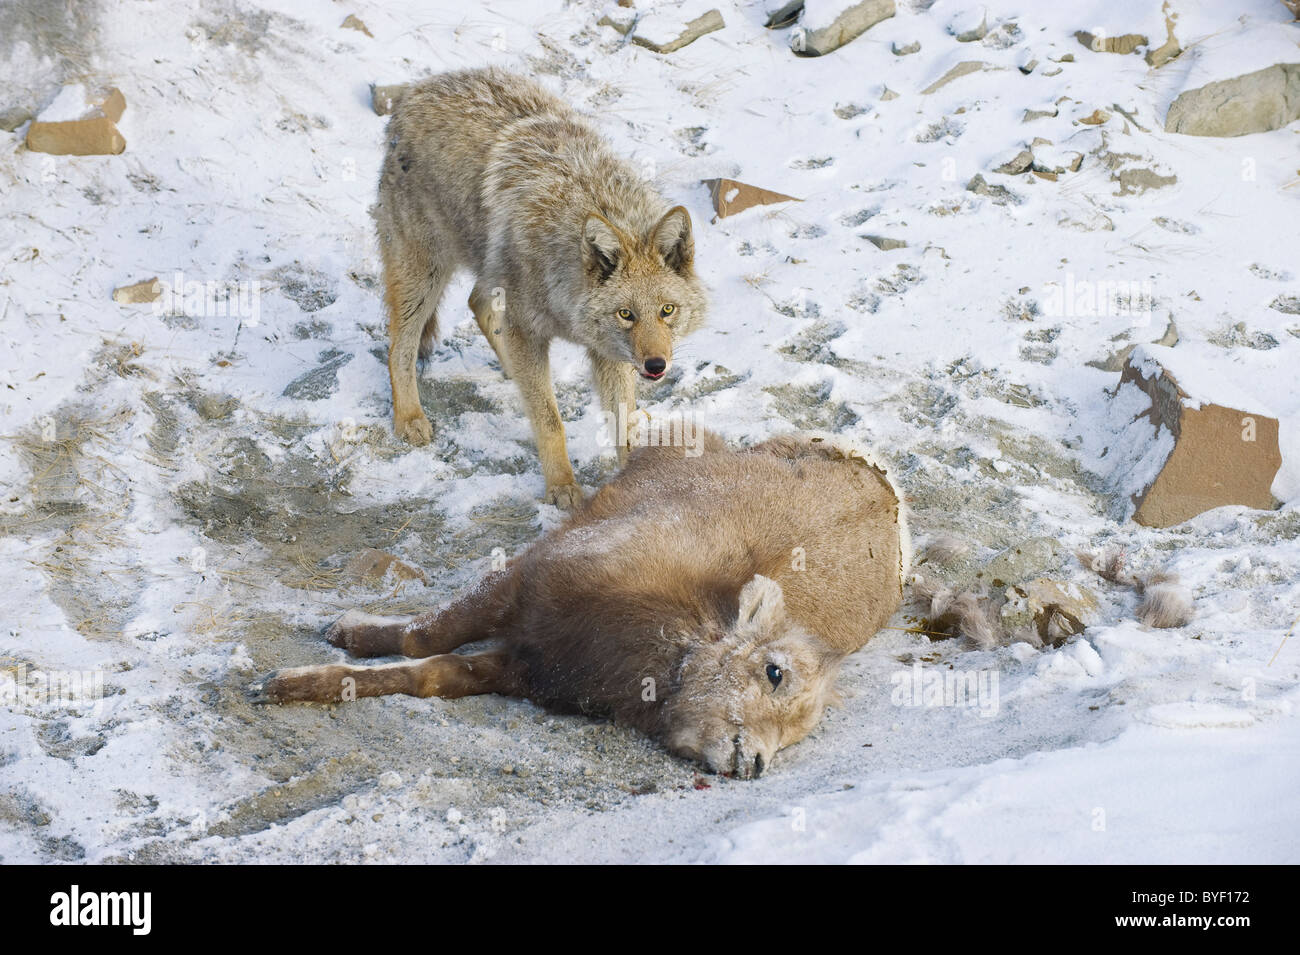 An adult coyote standing guard over a dead baby sheep Stock Photo